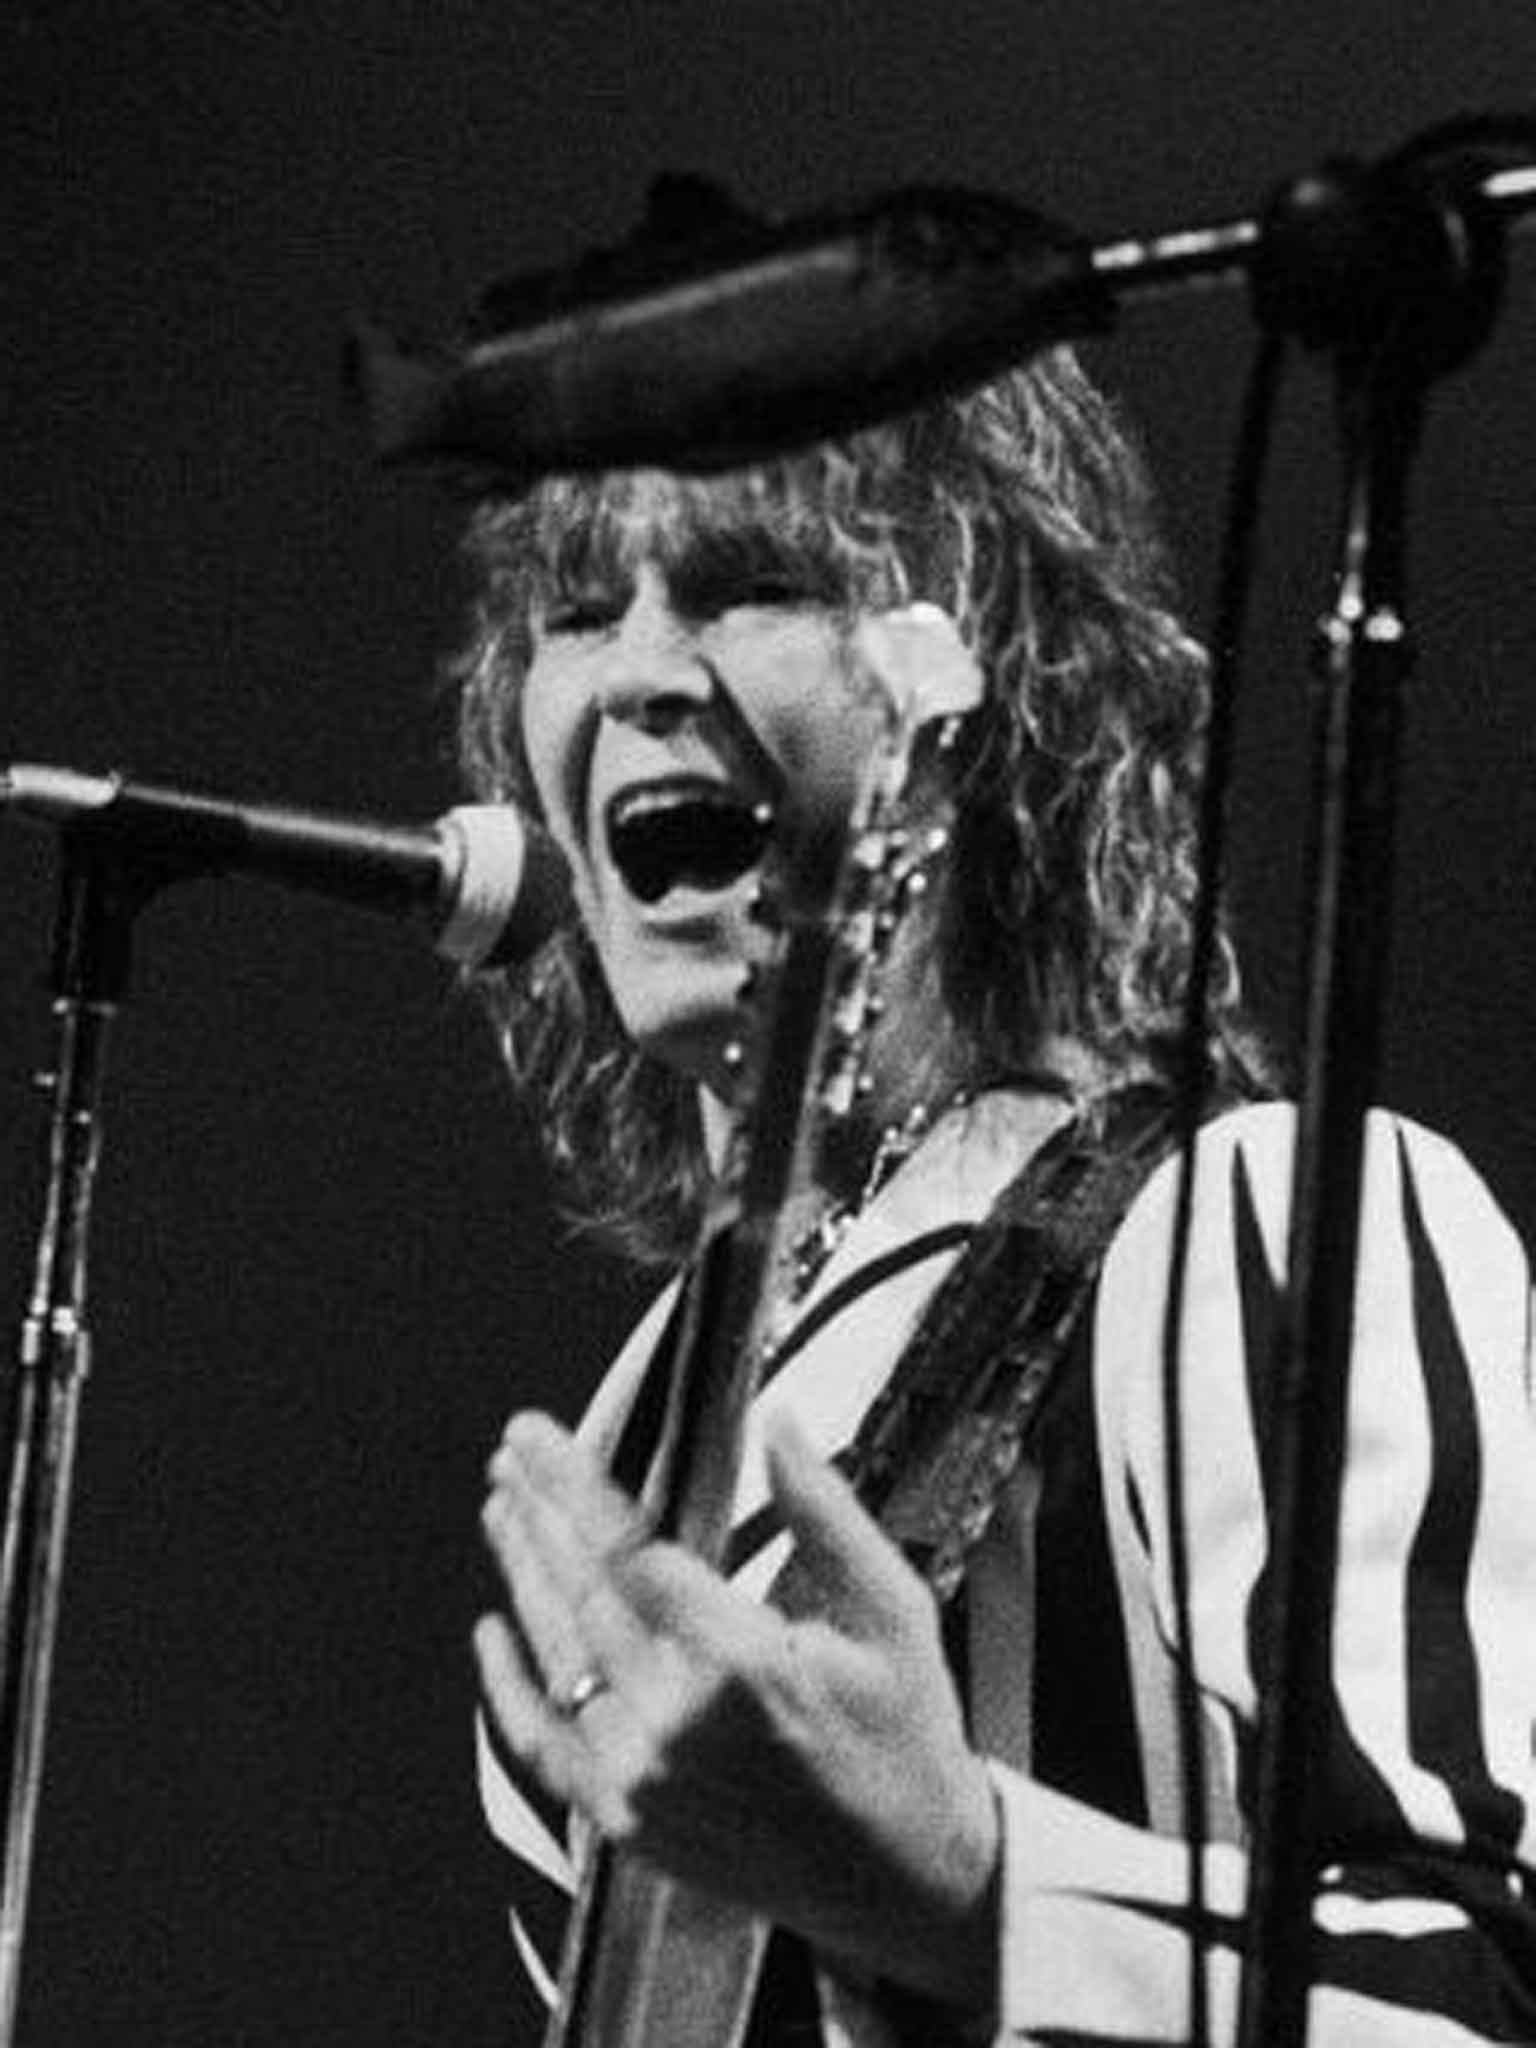 Chris Squire Innovative bass guitarist, singer and songwriter who co-founded Yes, best-selling giants of progressive rock The Independent The Independent image